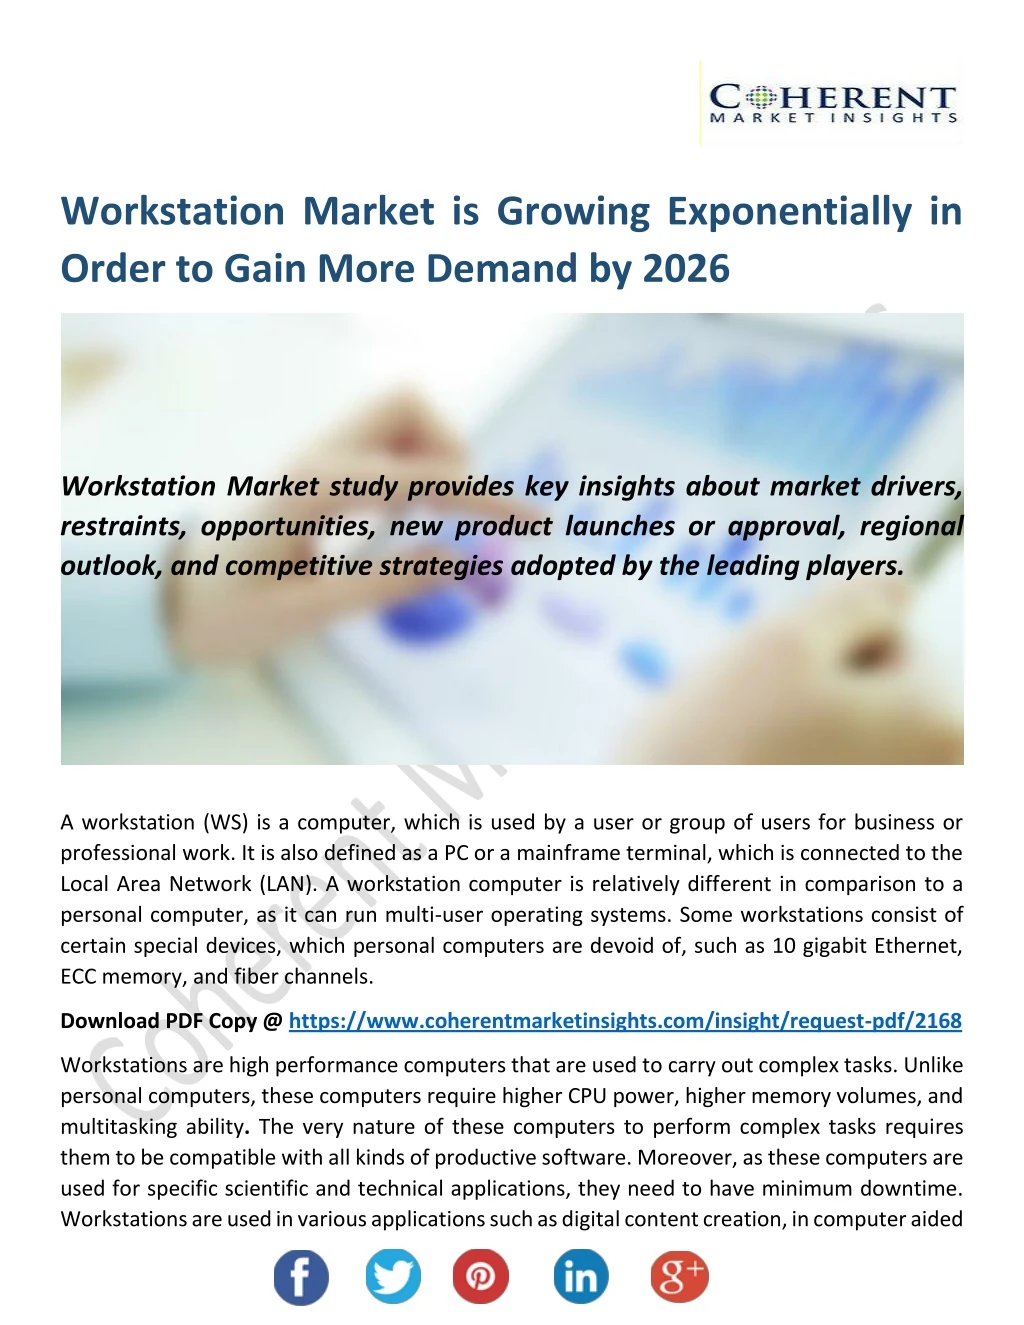 workstation market is growing exponentially